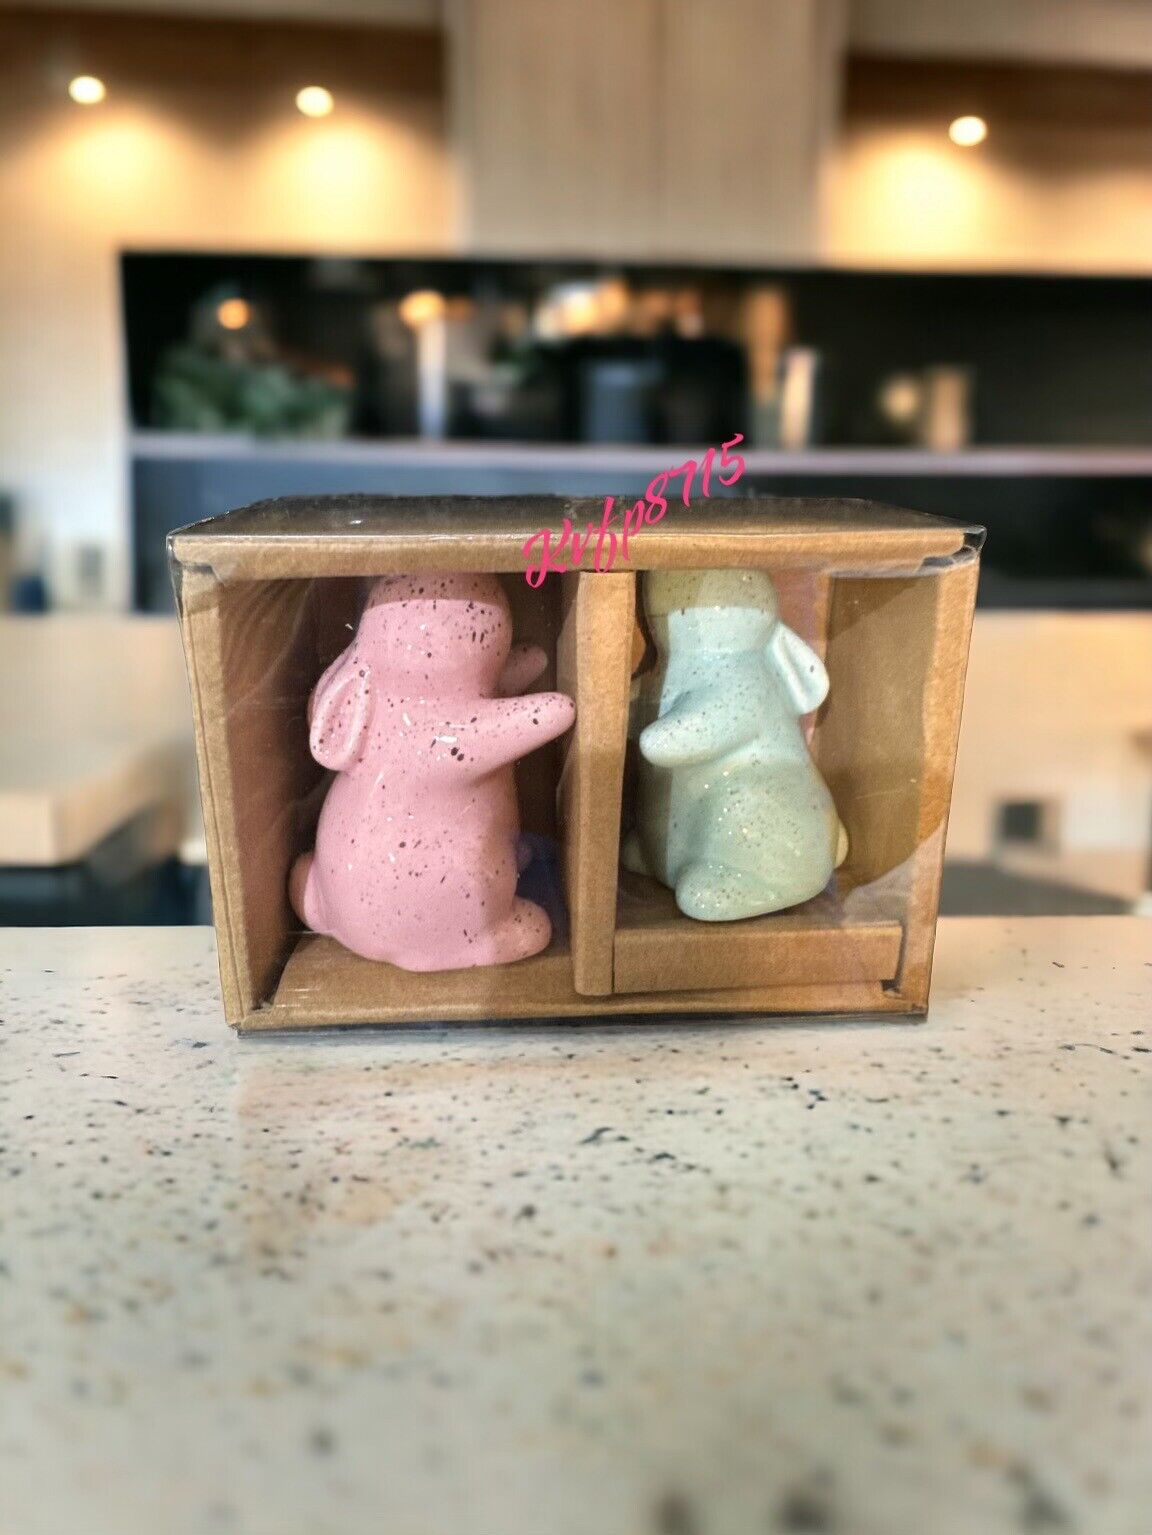 Bunny Pastel Cute Salt/ Pepper Shakers Collectibles Decor Cute Pink, Blue